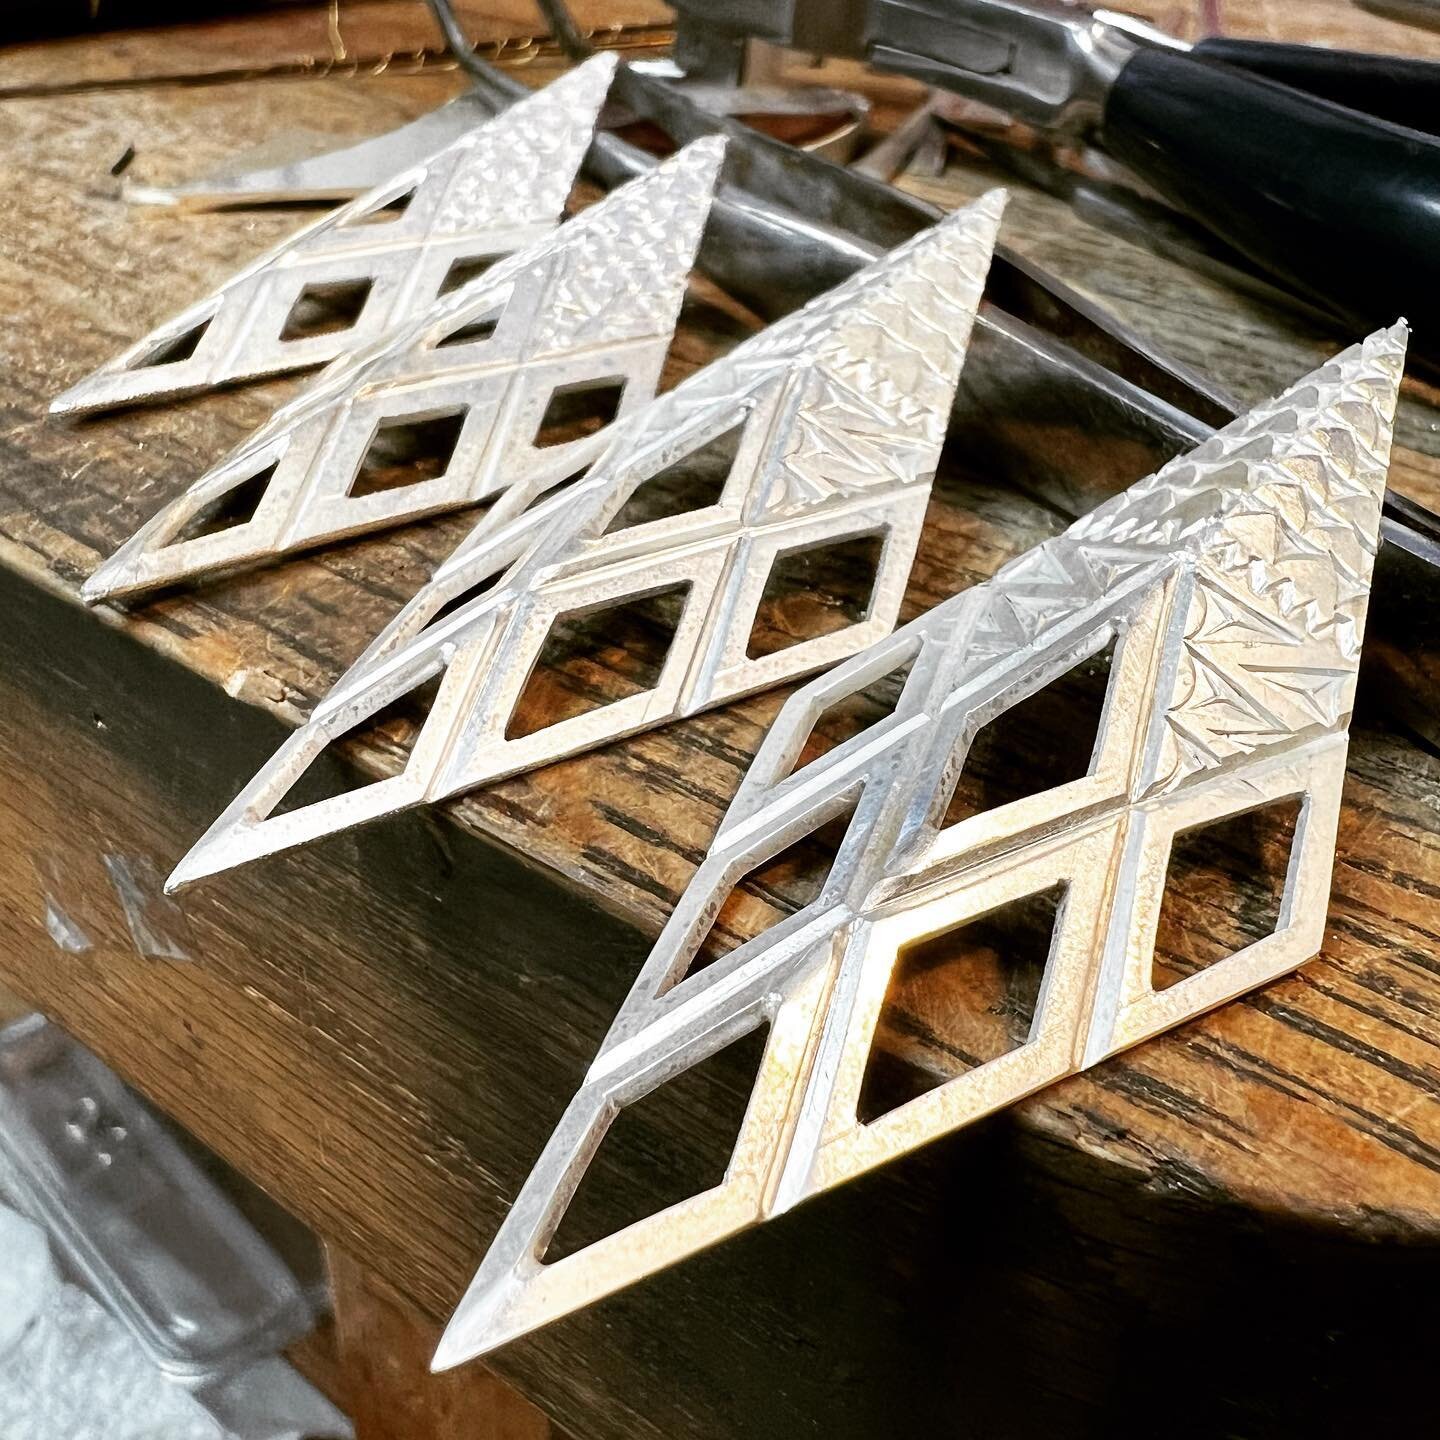 Progressing in the studio, these Prism earrings will be heading to the 2023 @heardmuseum Market!!! 🔥⚒️🔥 #earrings #jewelry #fashion #spring #art